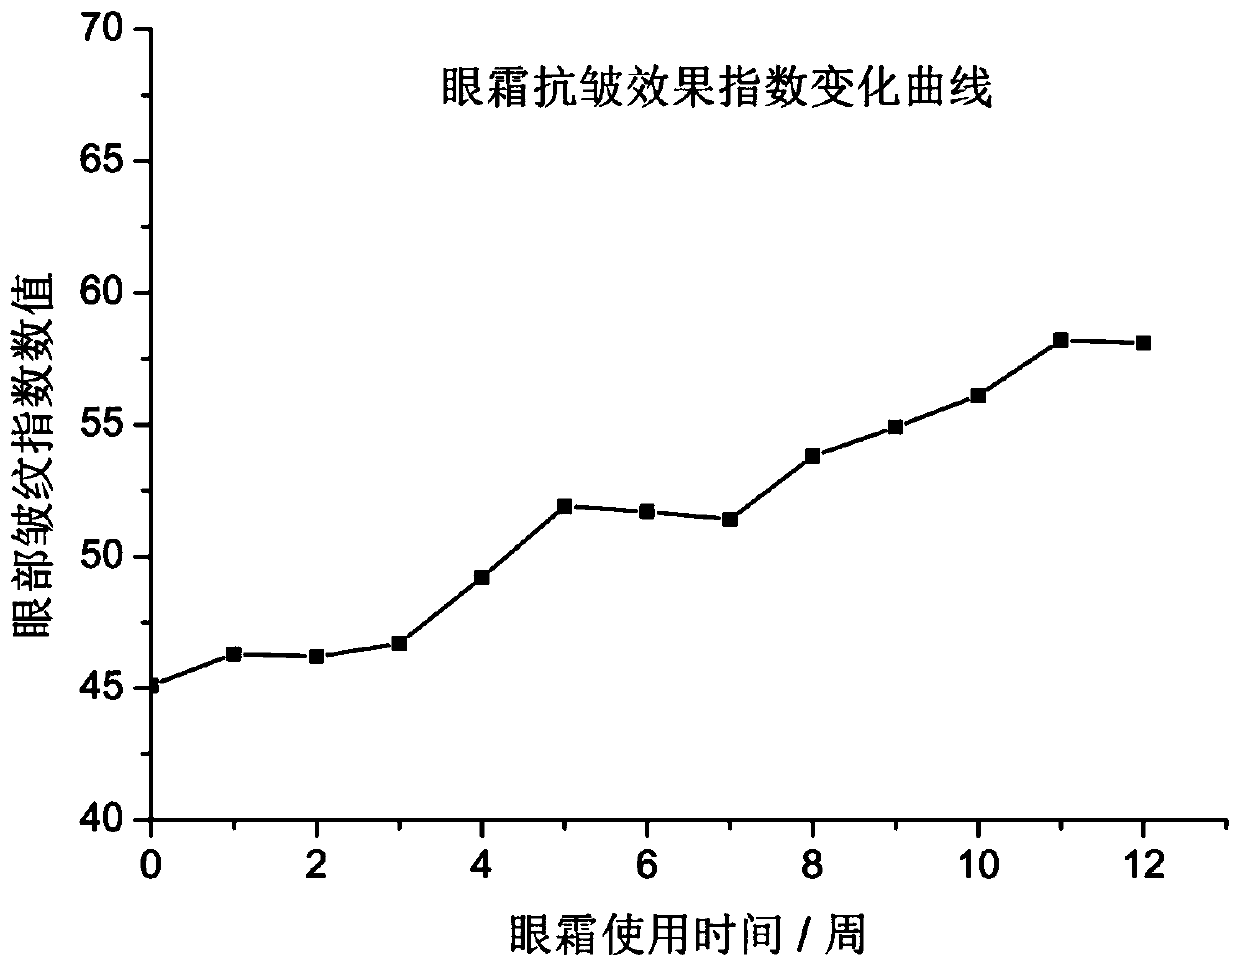 Anti-wrinkle eye cream containing NMN and preparation method and application thereof